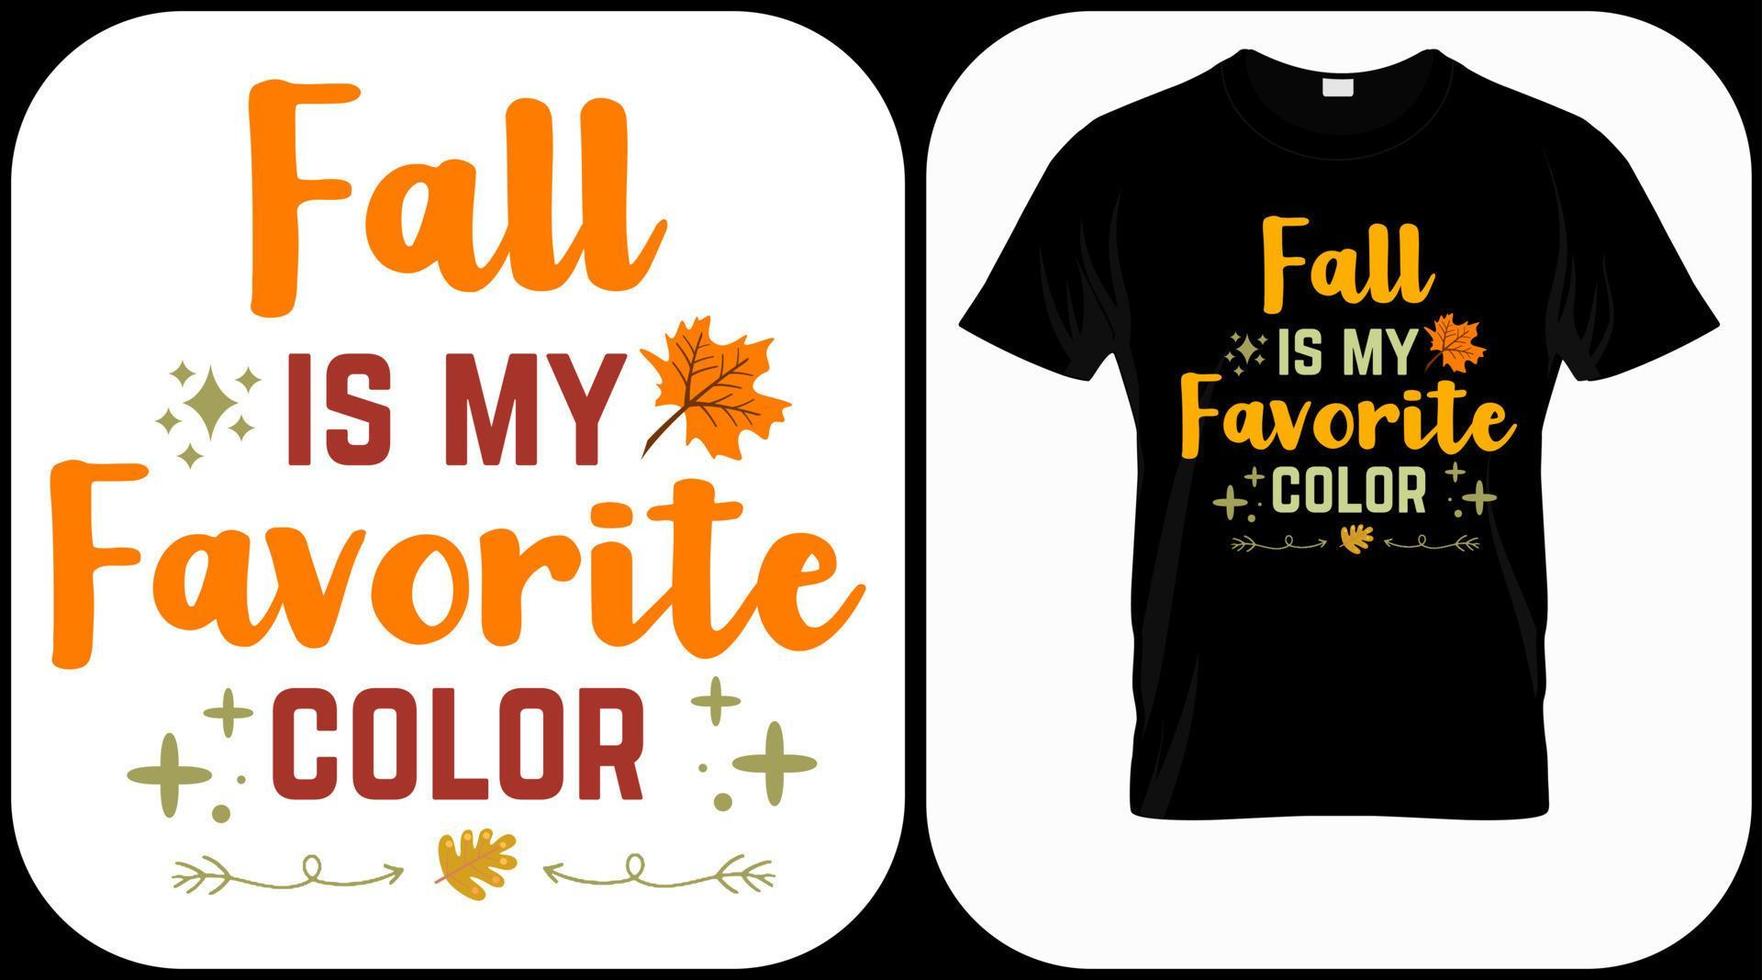 Fall is my favorite color. Autumn season hand  written phrase. Colorful fall season hand drawn slogan. Autumn theme lettering vector phrases. Scrapbooking elements for harvest party.